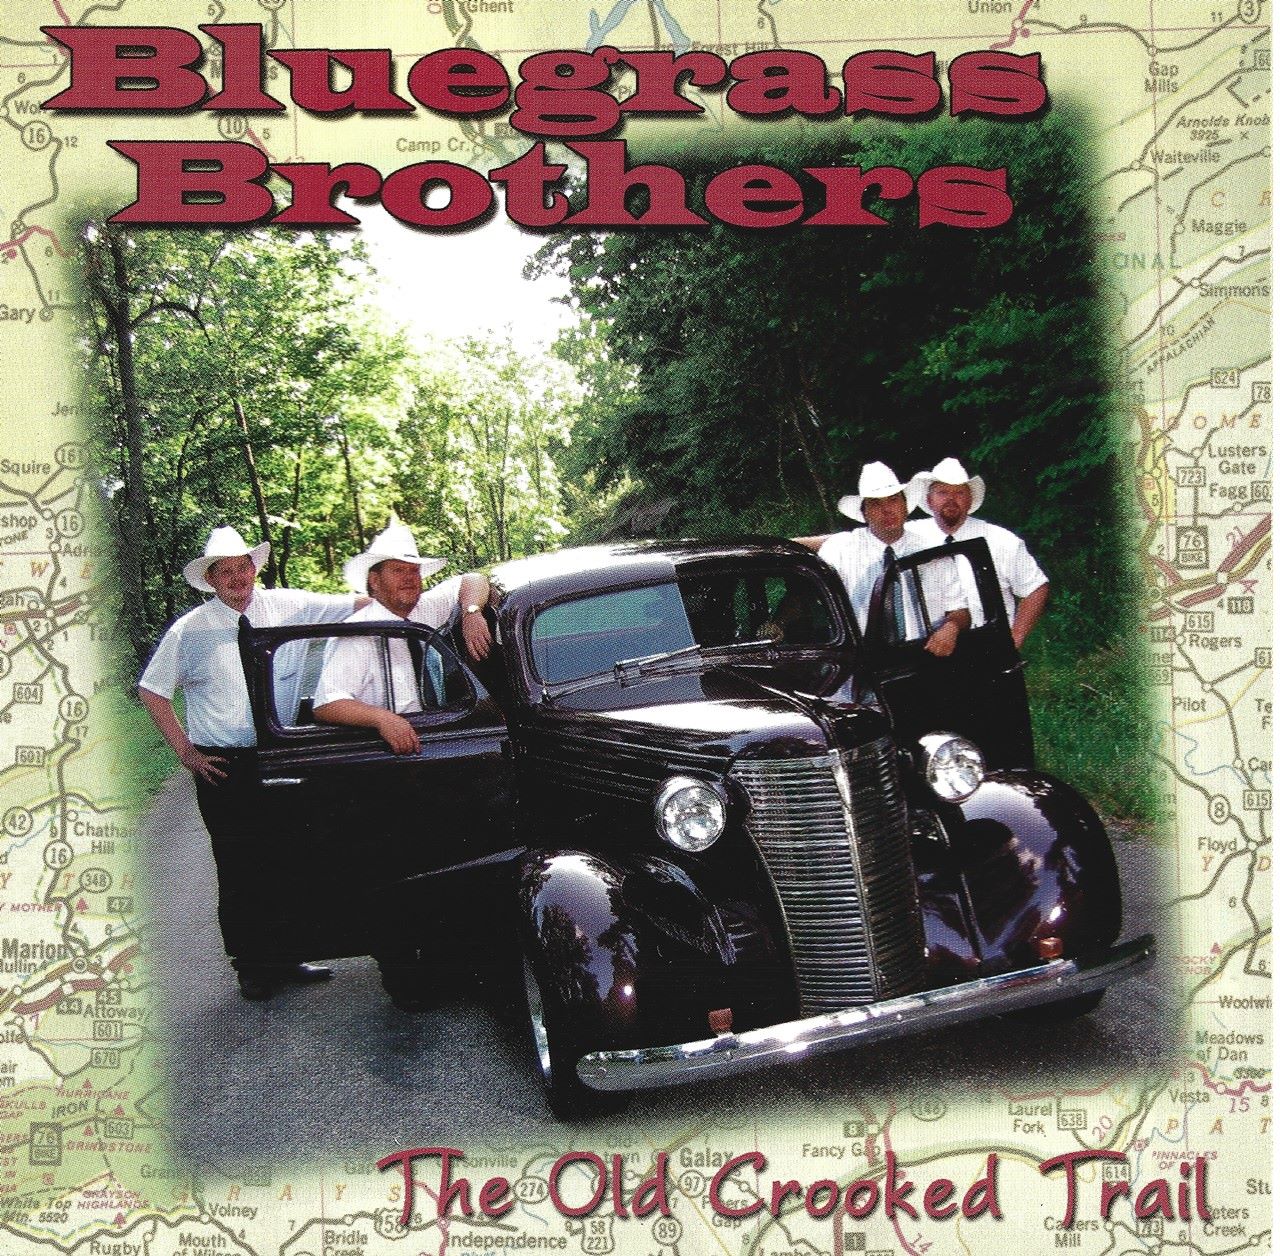 Bluegrass Brothers – The Old Crooked Trail cover album